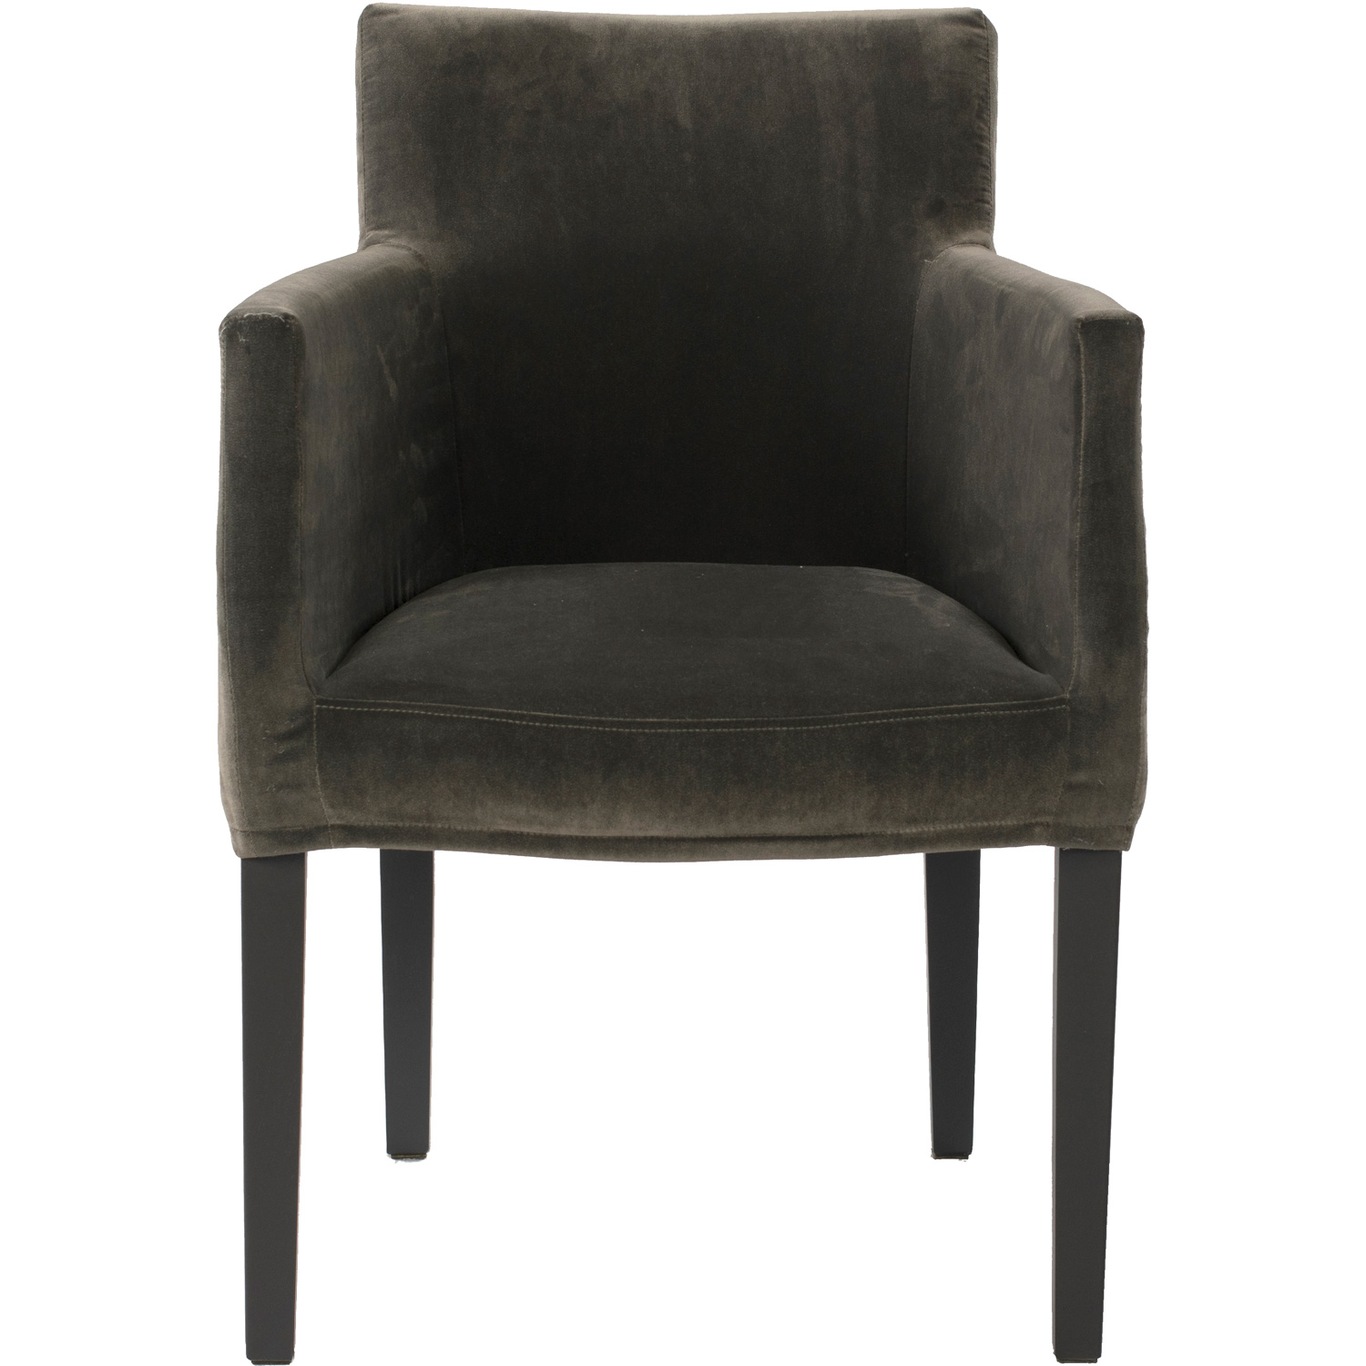 Brooklyn Chair Loose Cover, Black / Omega Graphite 51